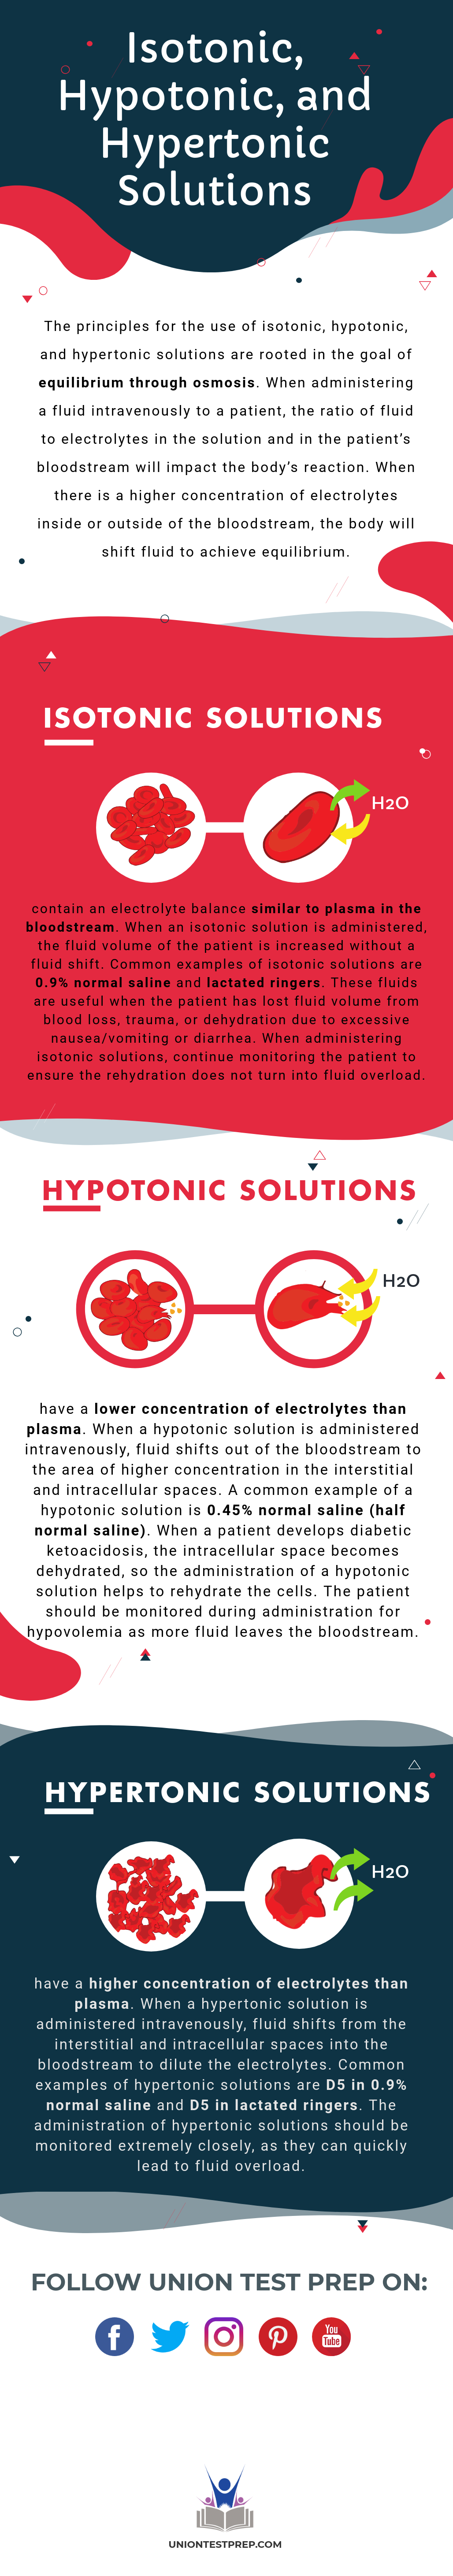 Difference Between Isotonic, Hypotonic, Hypertonic